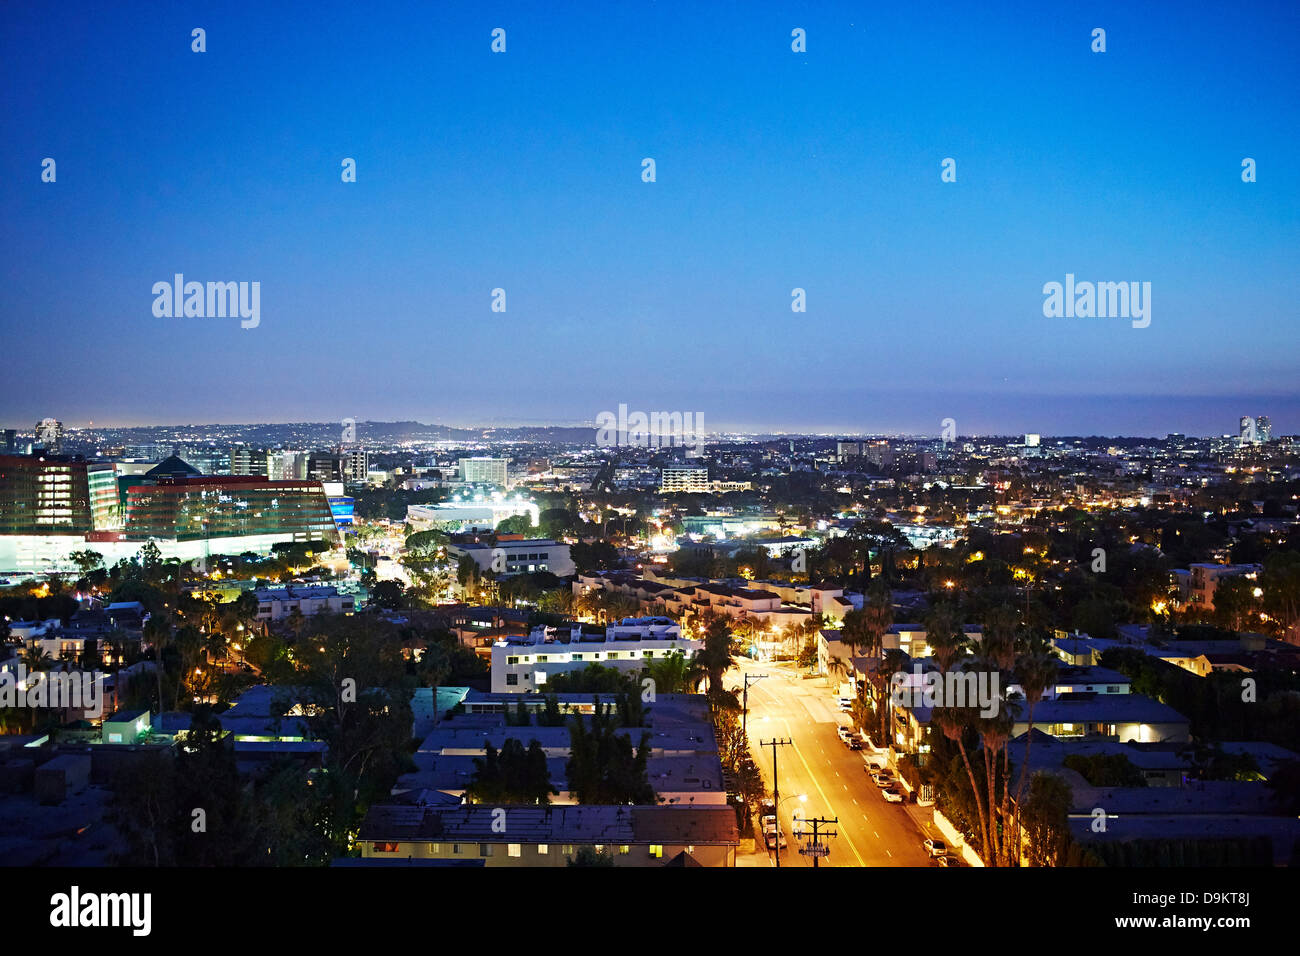 Cityscape at night, Los Angeles, Californie, USA Banque D'Images